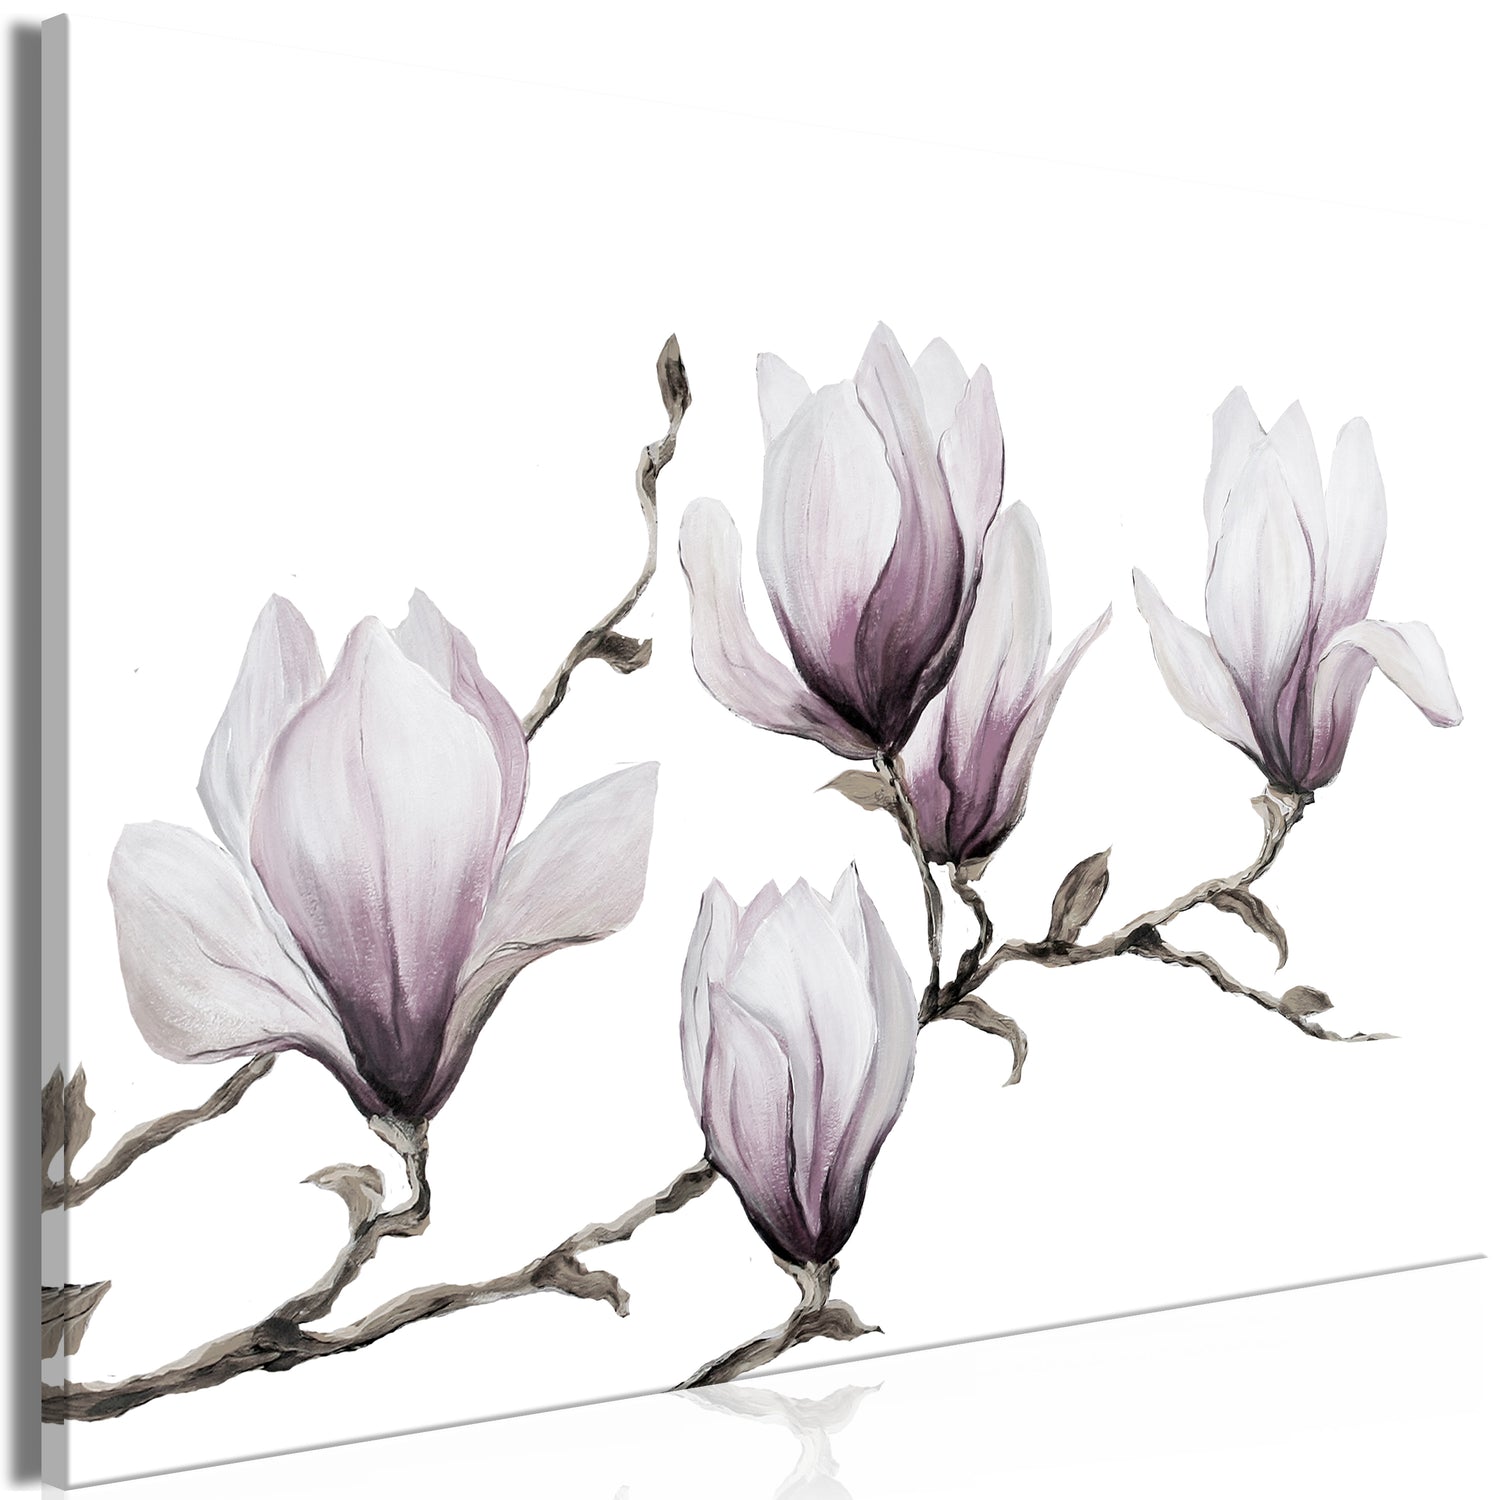 Floral Canvas Wall Art - Painted Magnolias